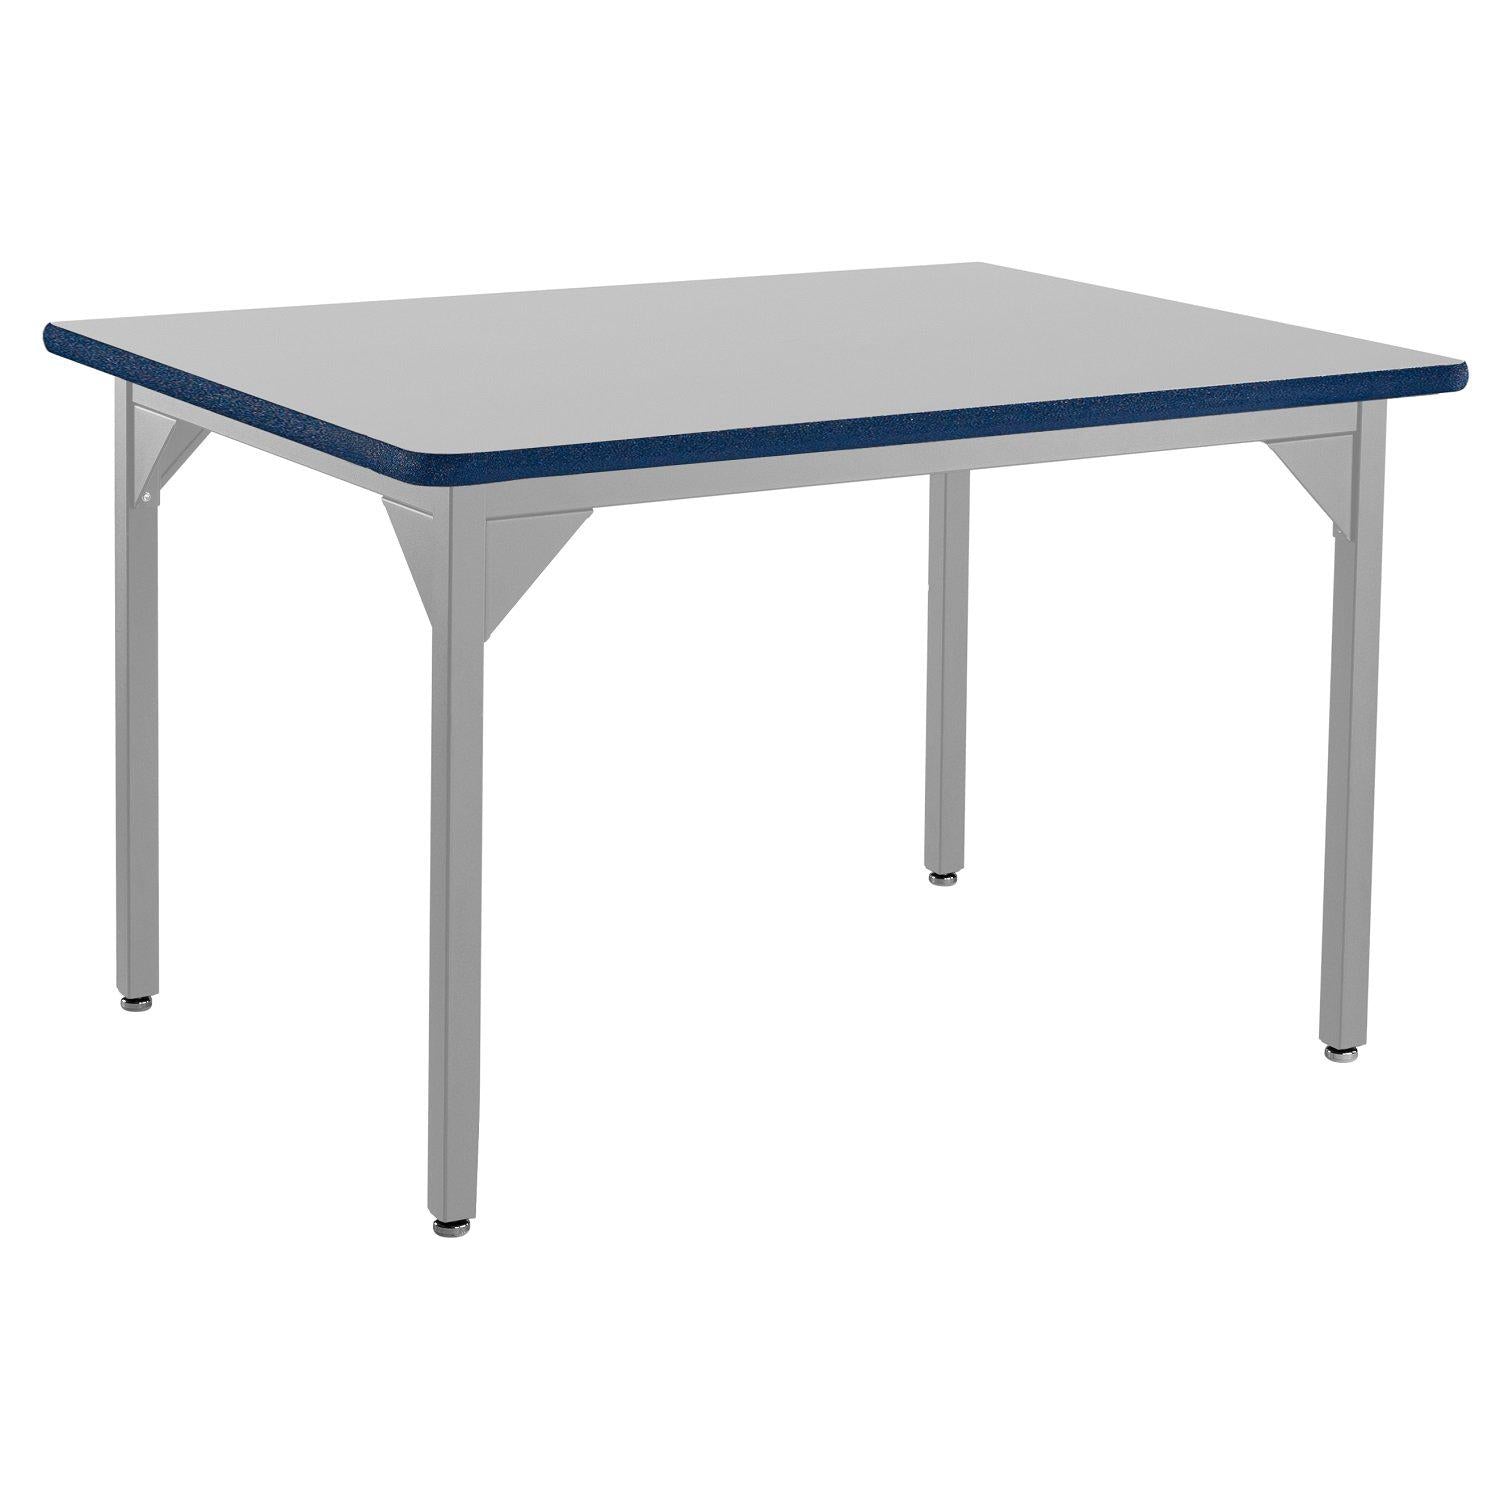 Heavy-Duty Fixed Height Utility Table, Soft Grey Frame, 36" x 60", Supreme High-Pressure Laminate Top with Black ProtectEdge